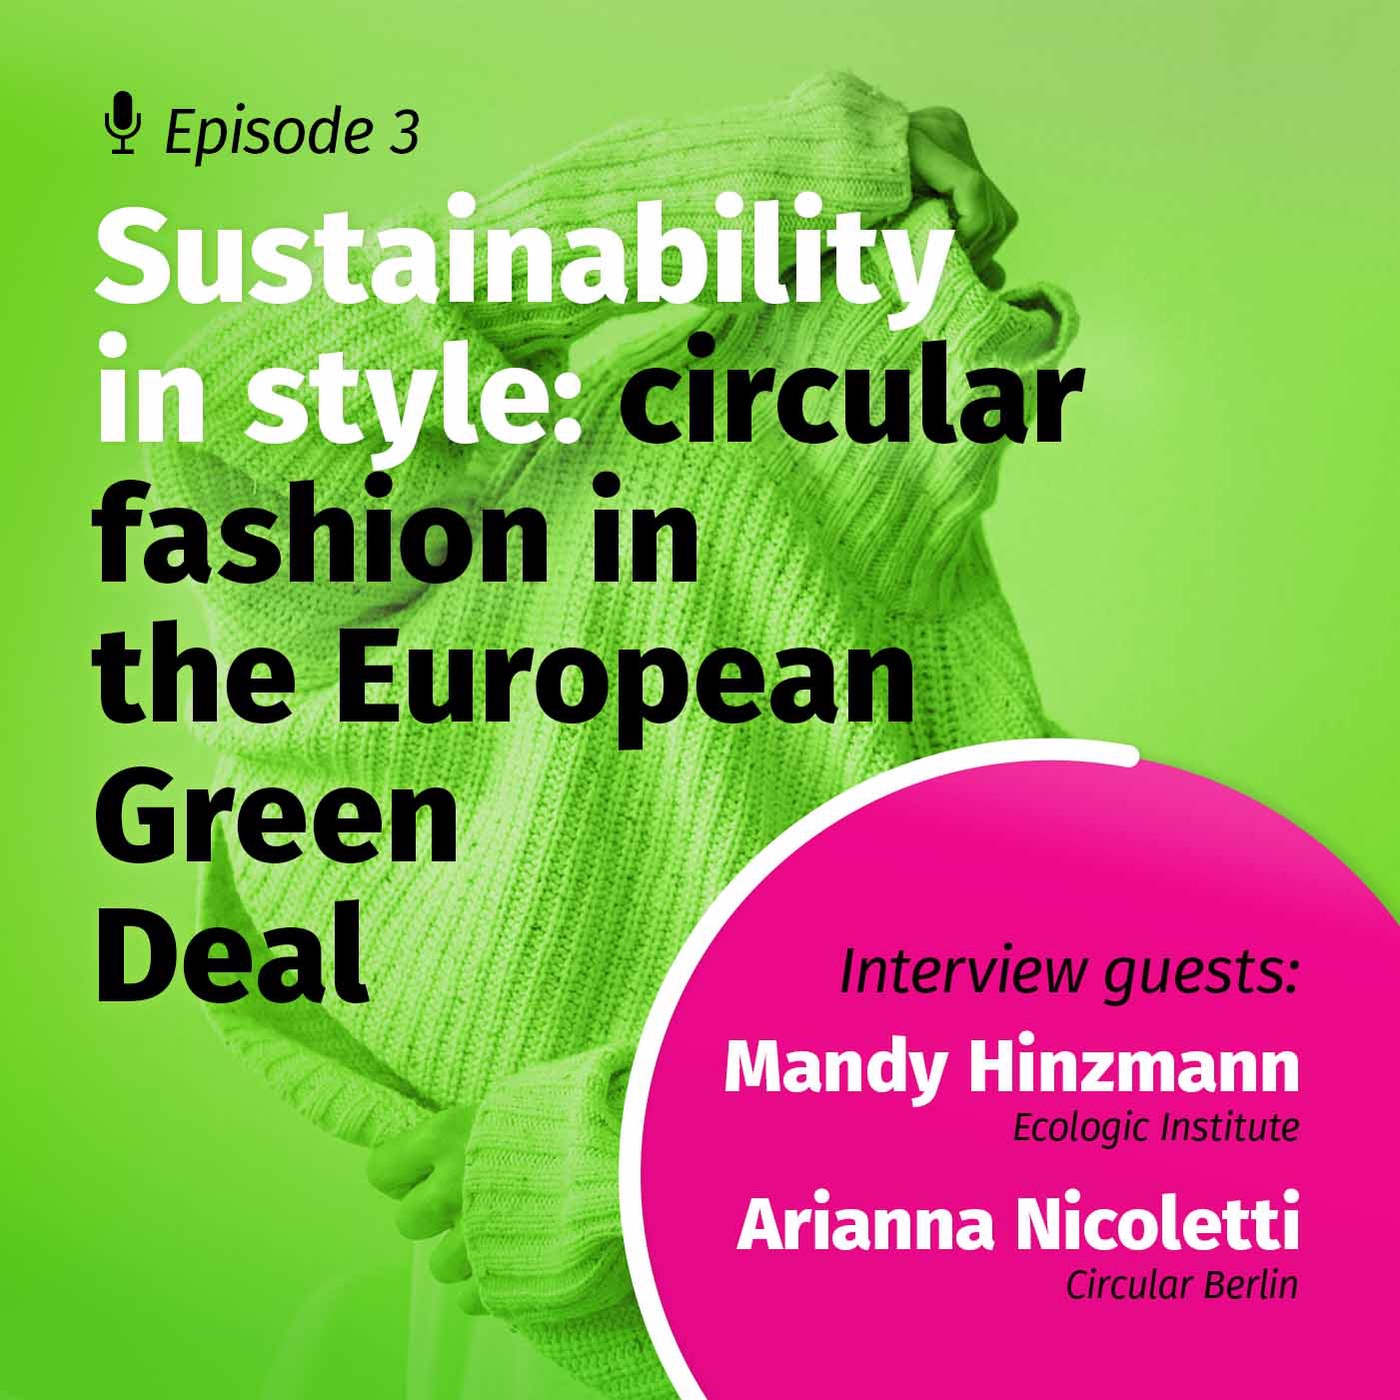 Sustainability in style: circular fashion in the European Green Deal